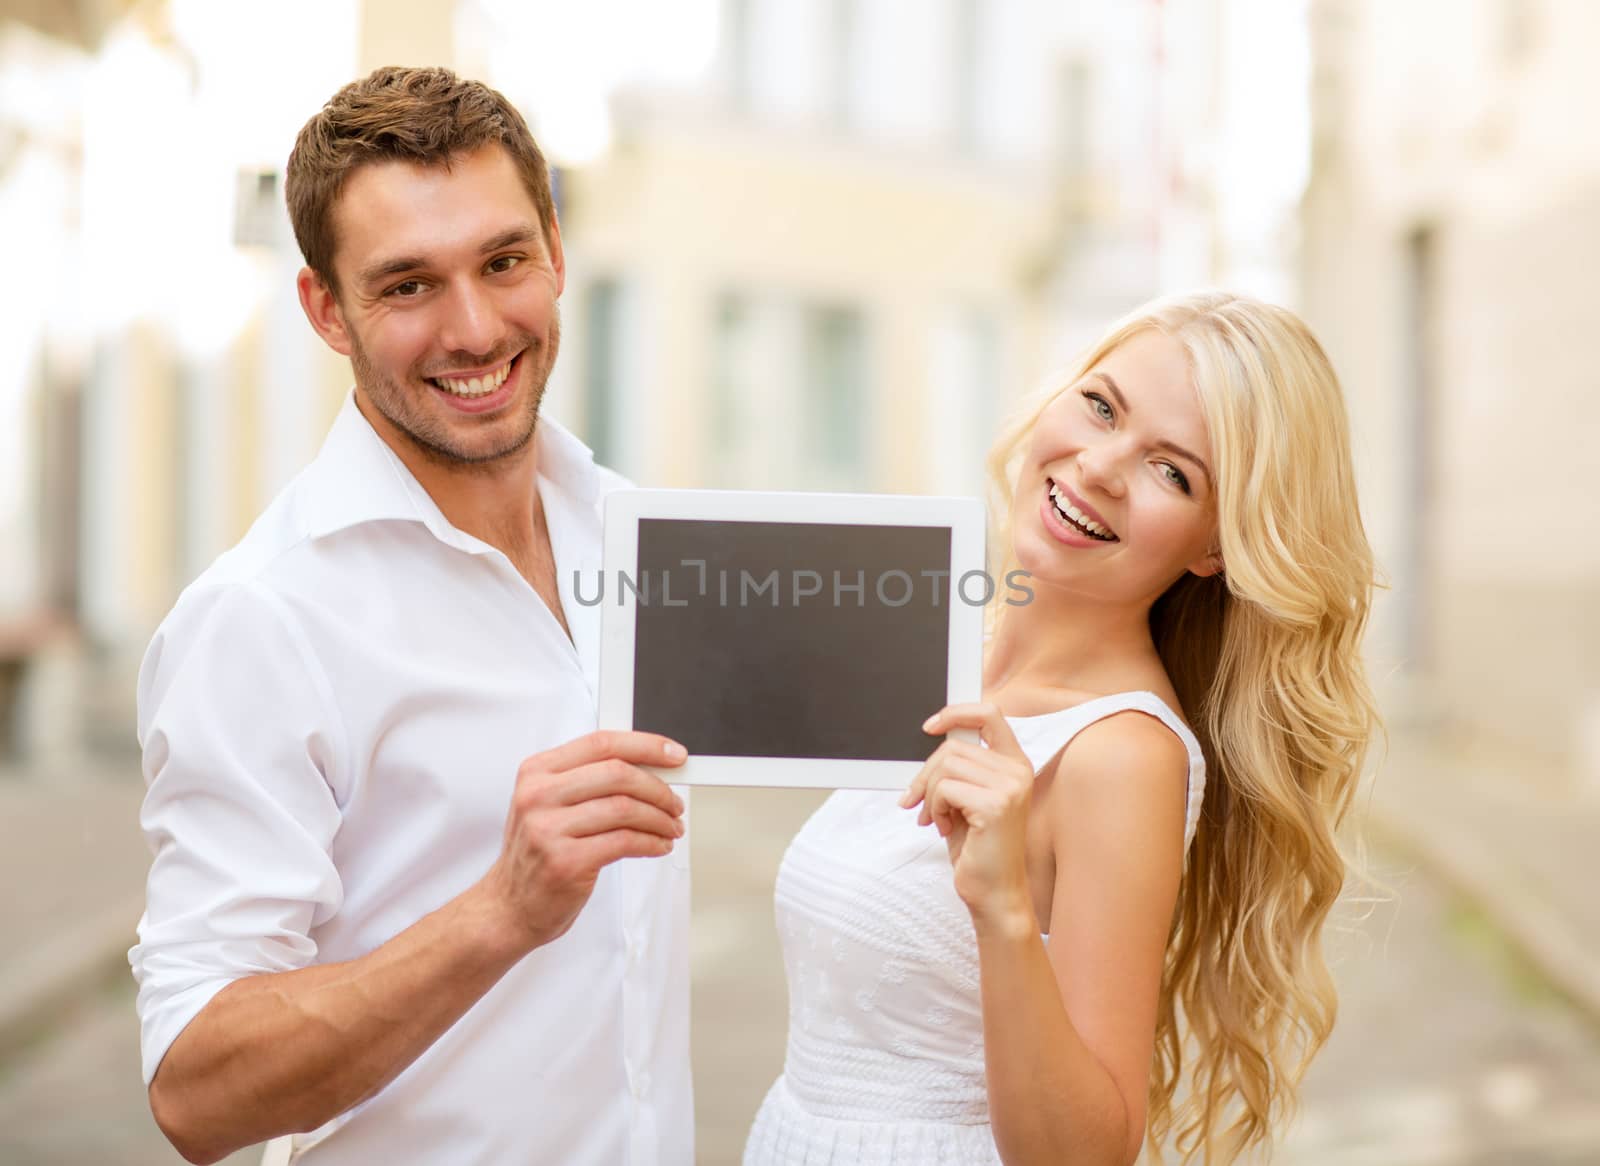 summer holidays, wedding, dating and technology concept - couple with tablet pc in the city